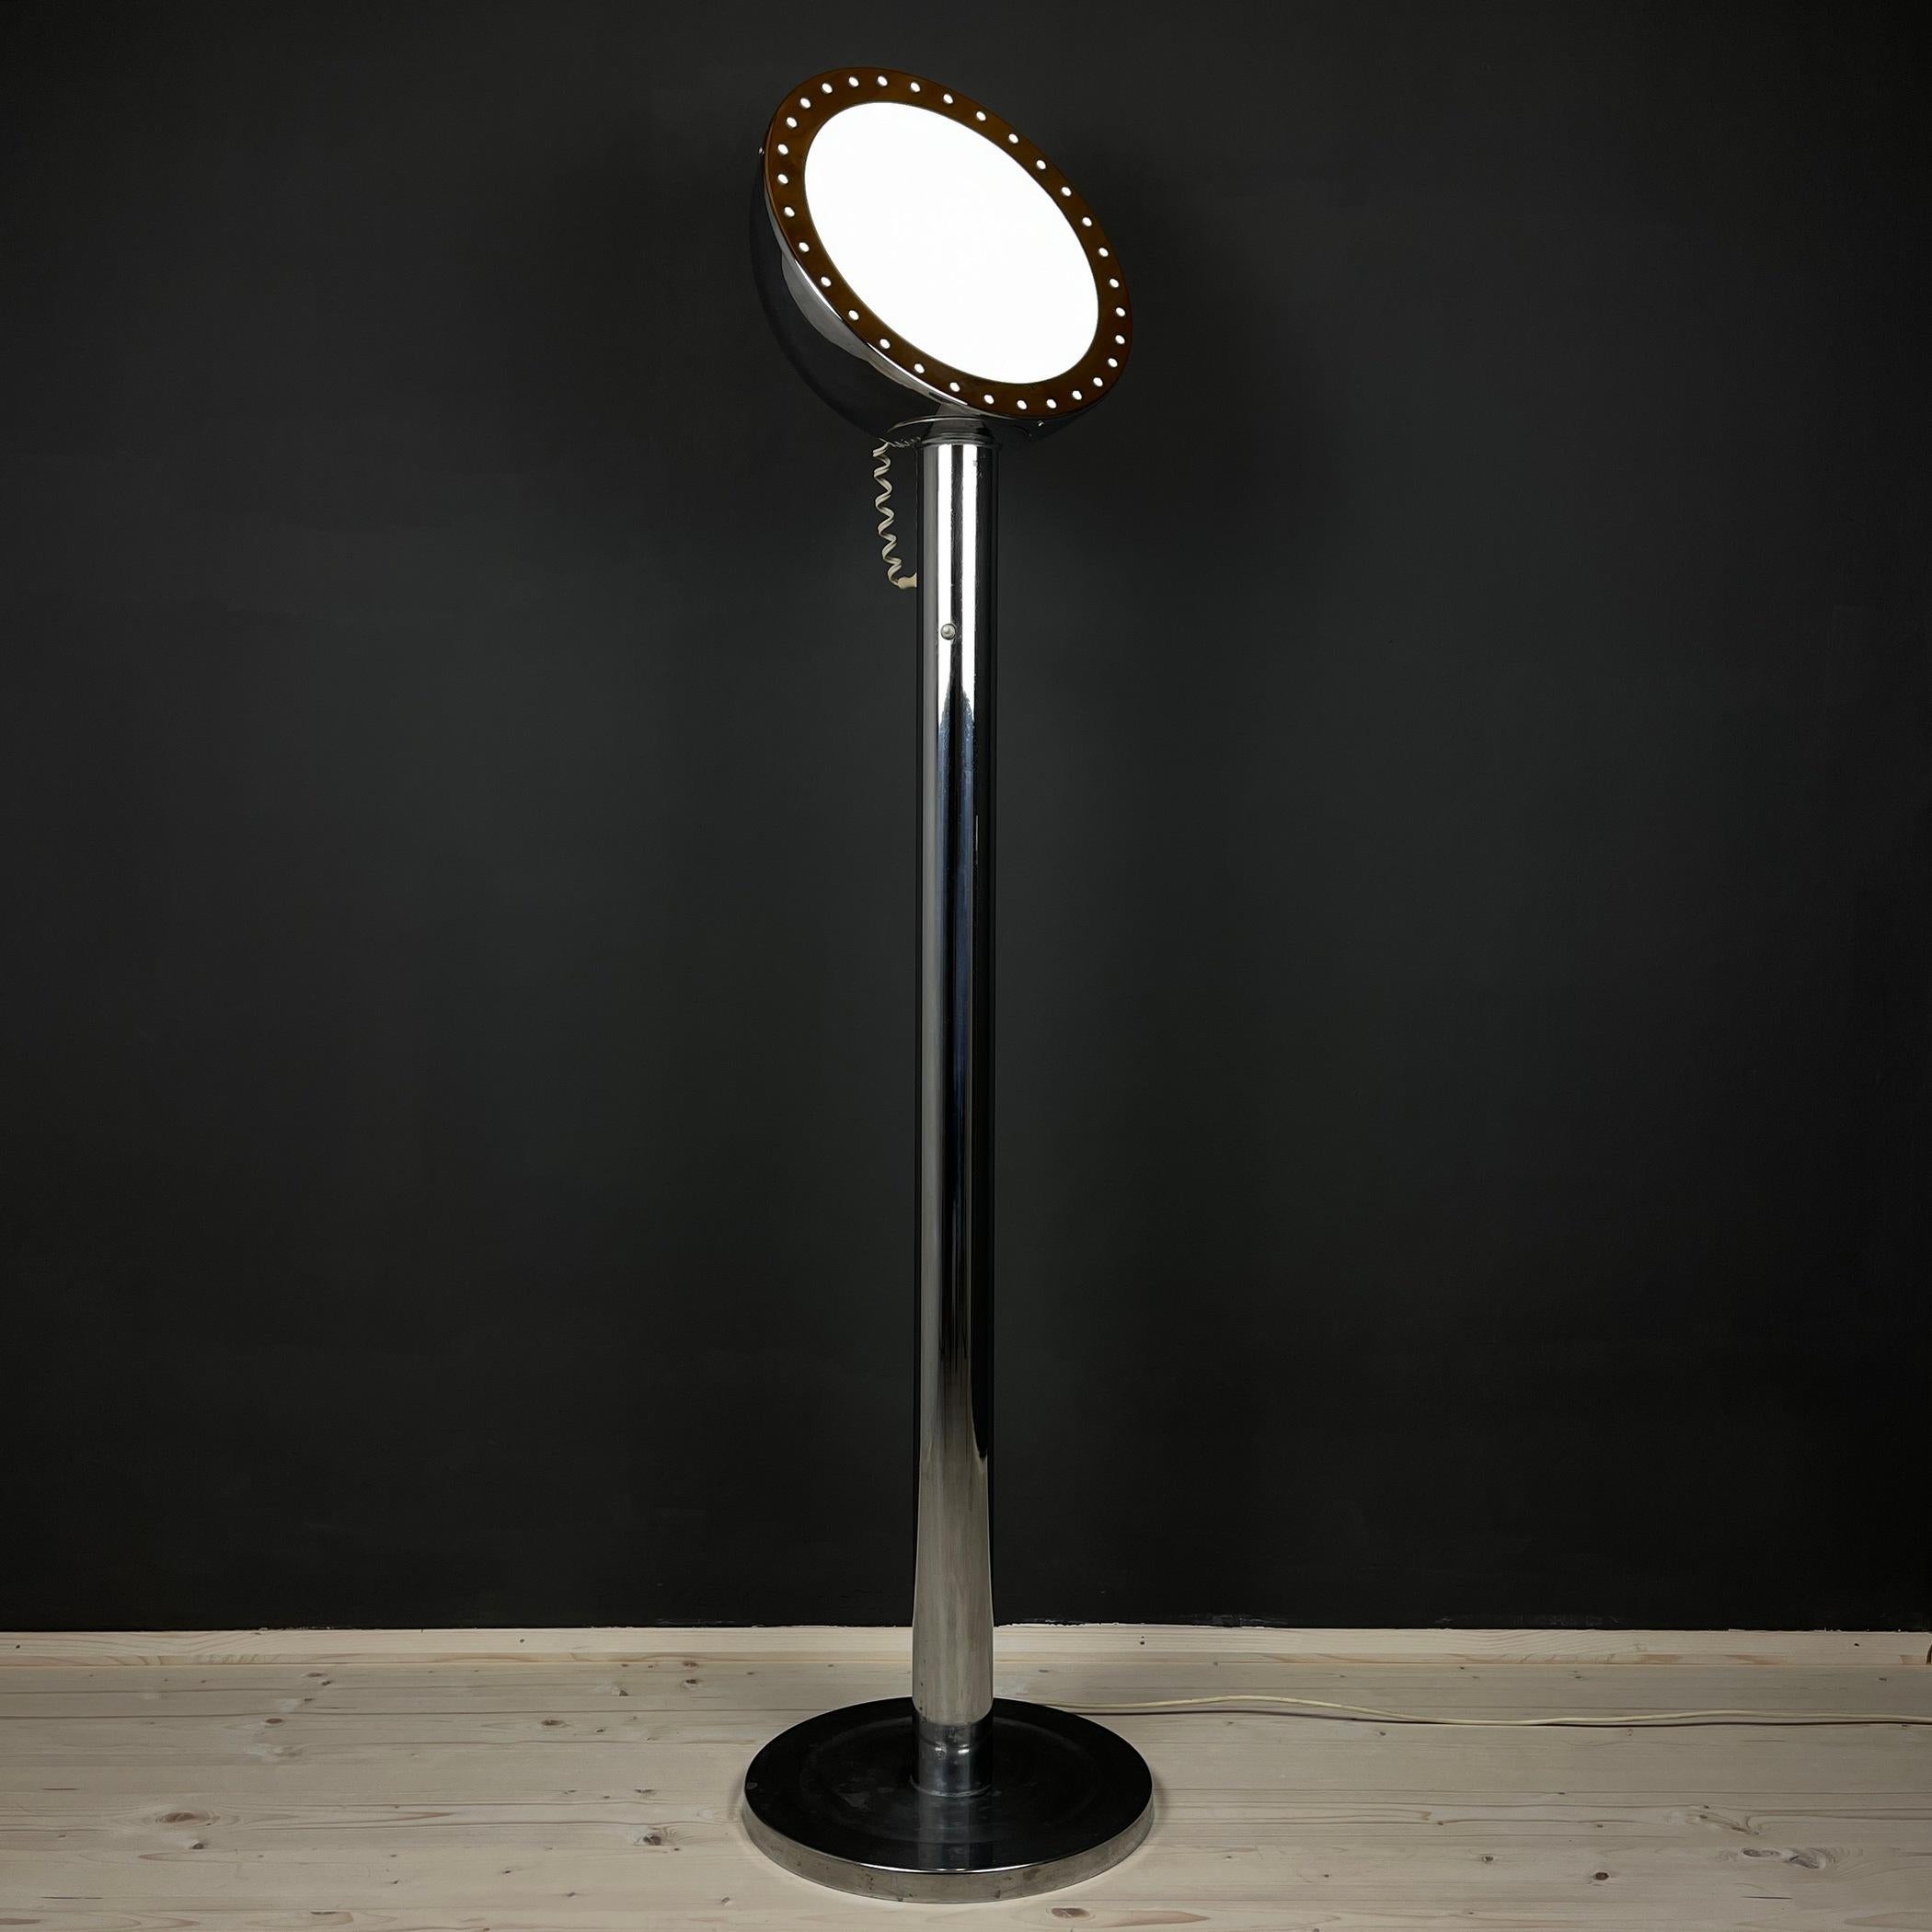 Beautiful and unique floor lamp made by Goffredo Reggiani, dating from the 1960s, with a steel body and a diffuser that can be moved at whim and is attached to the core body by a strong magnet that makes installing it easier.
Very good vintage